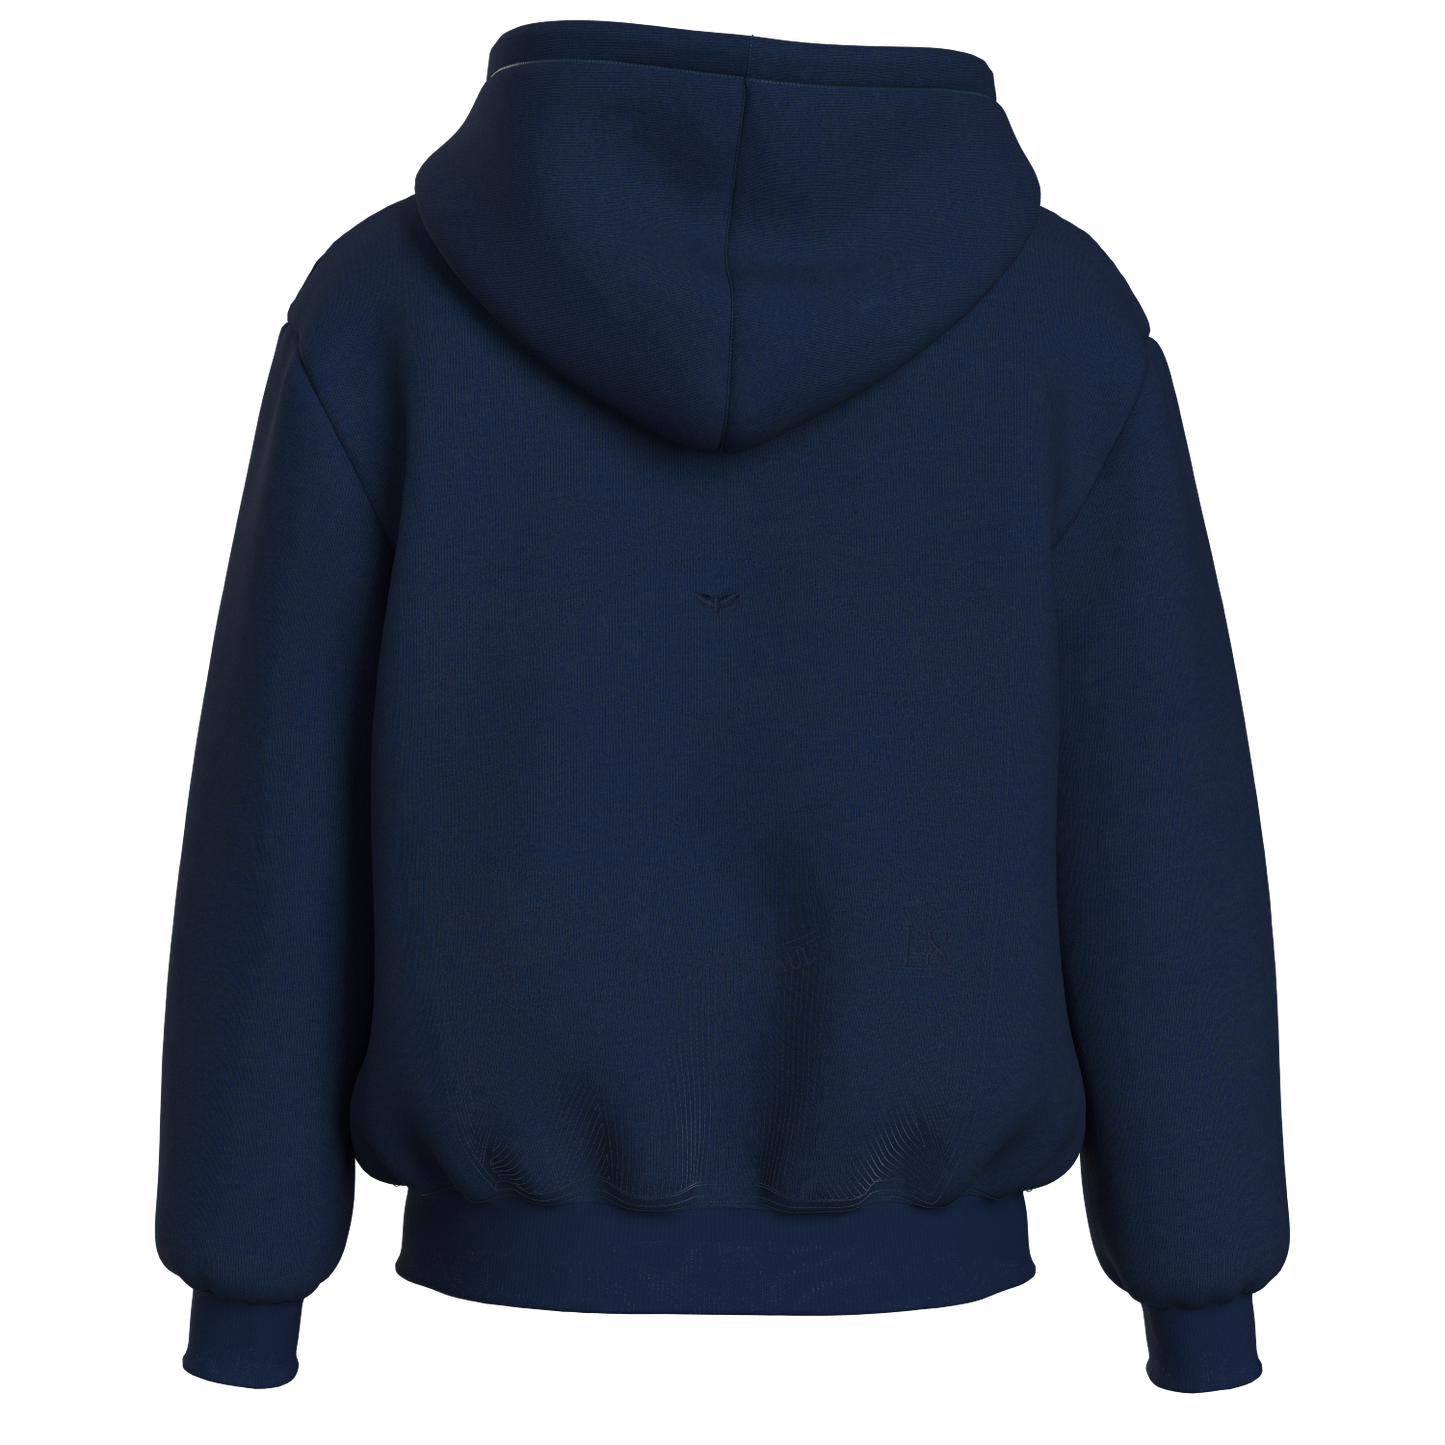 Navy Hoodie with Embroidered logo